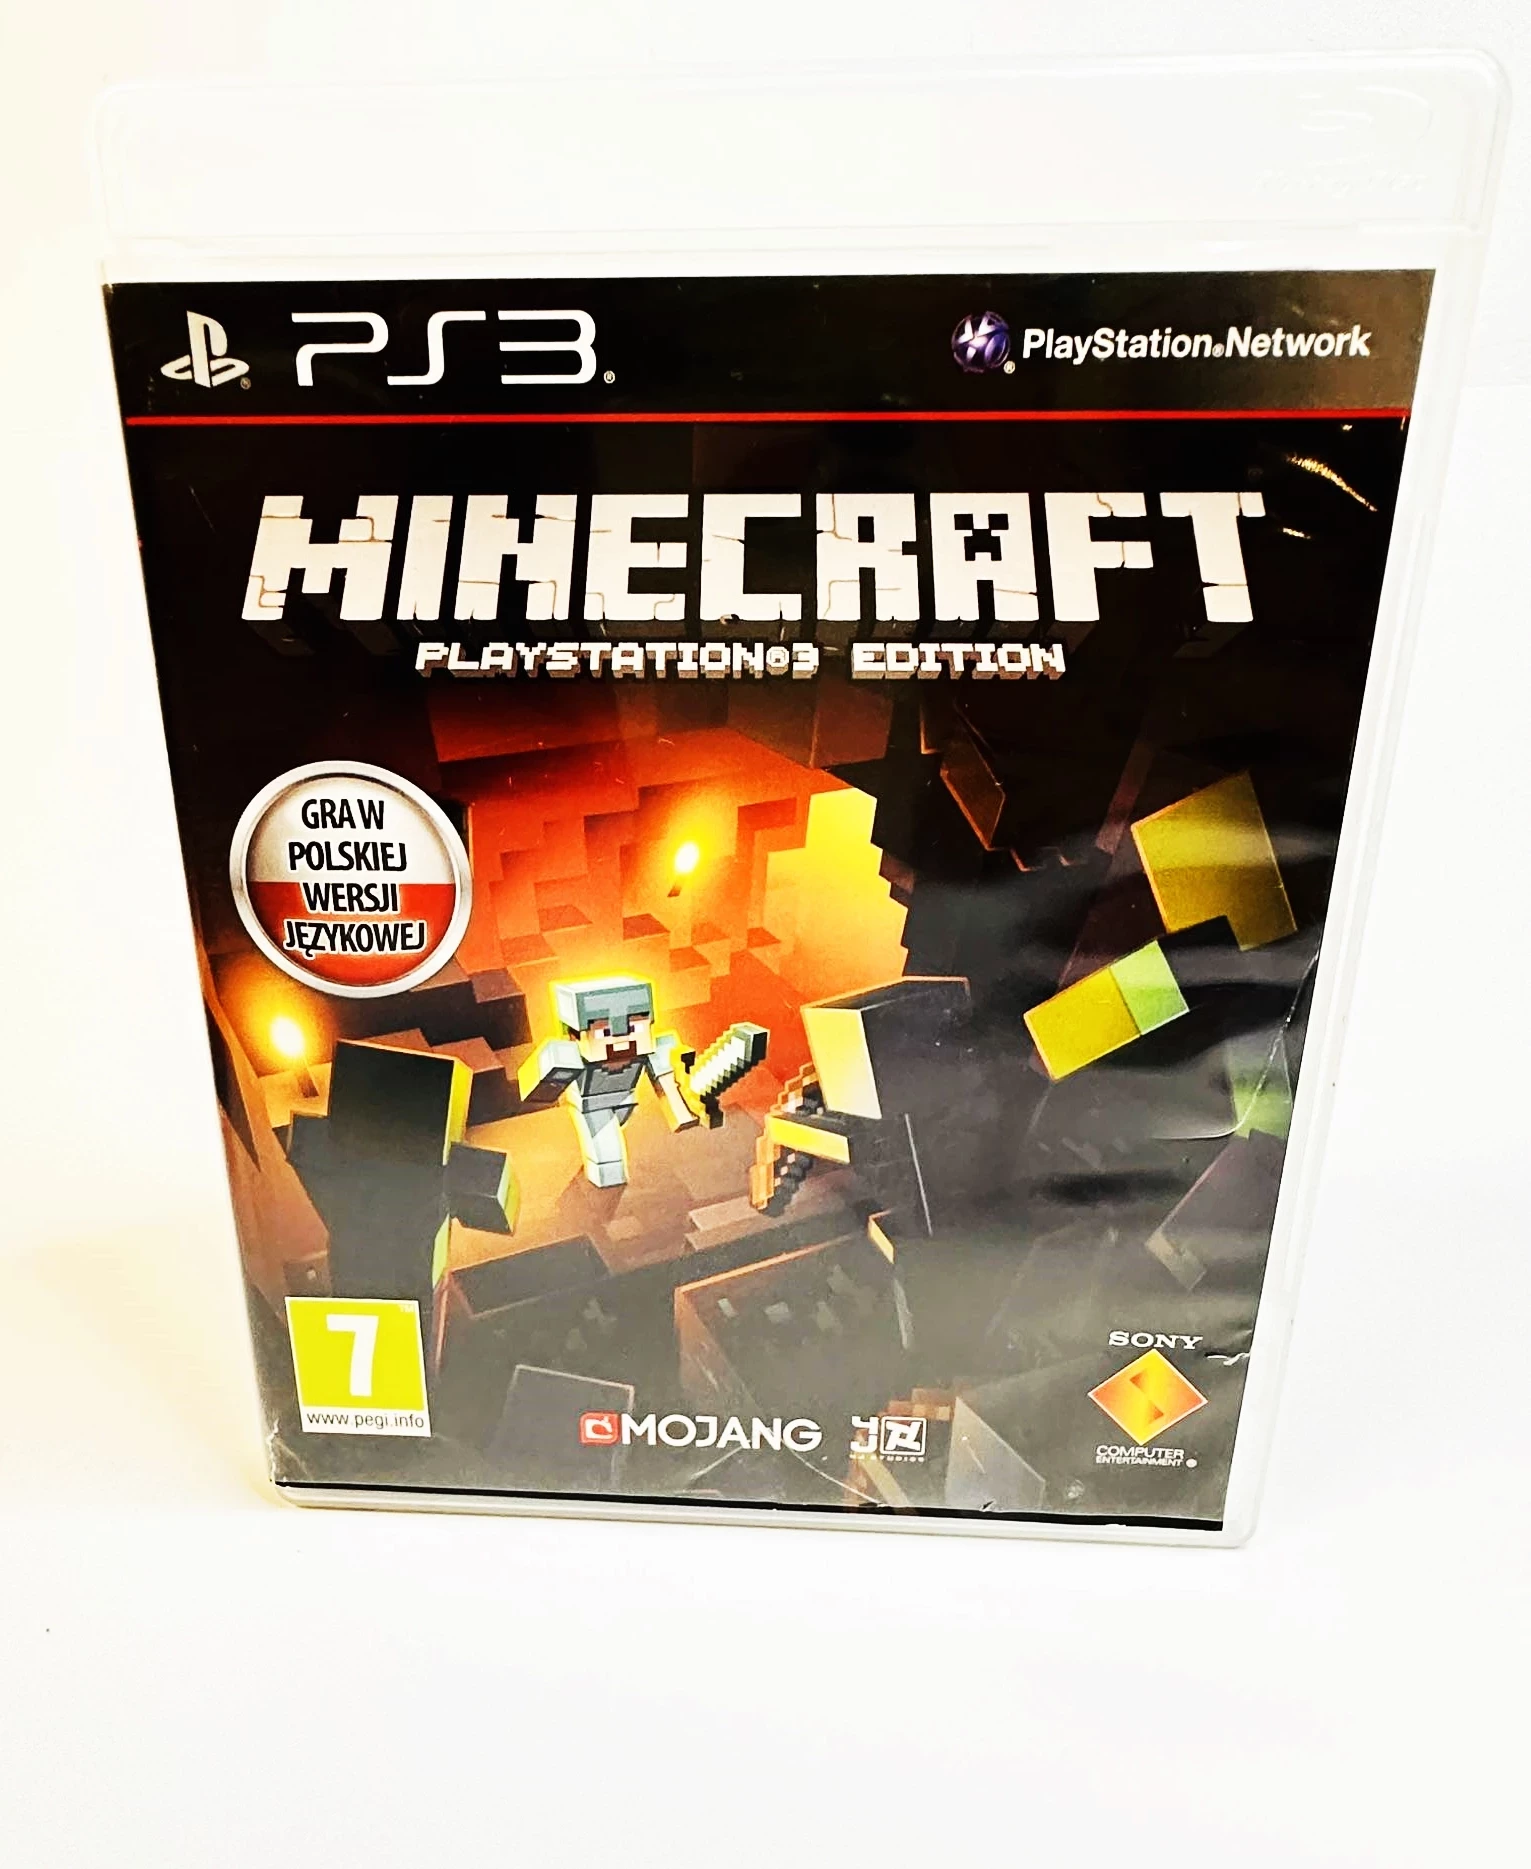 Minecraft: Playstation 3 Edition has failed to load, and cannot continue.  - MCPS3: Discussion - Minecraft: Playstation 3 Edition - Minecraft: Editions  - Minecraft Forum - Minecraft Forum